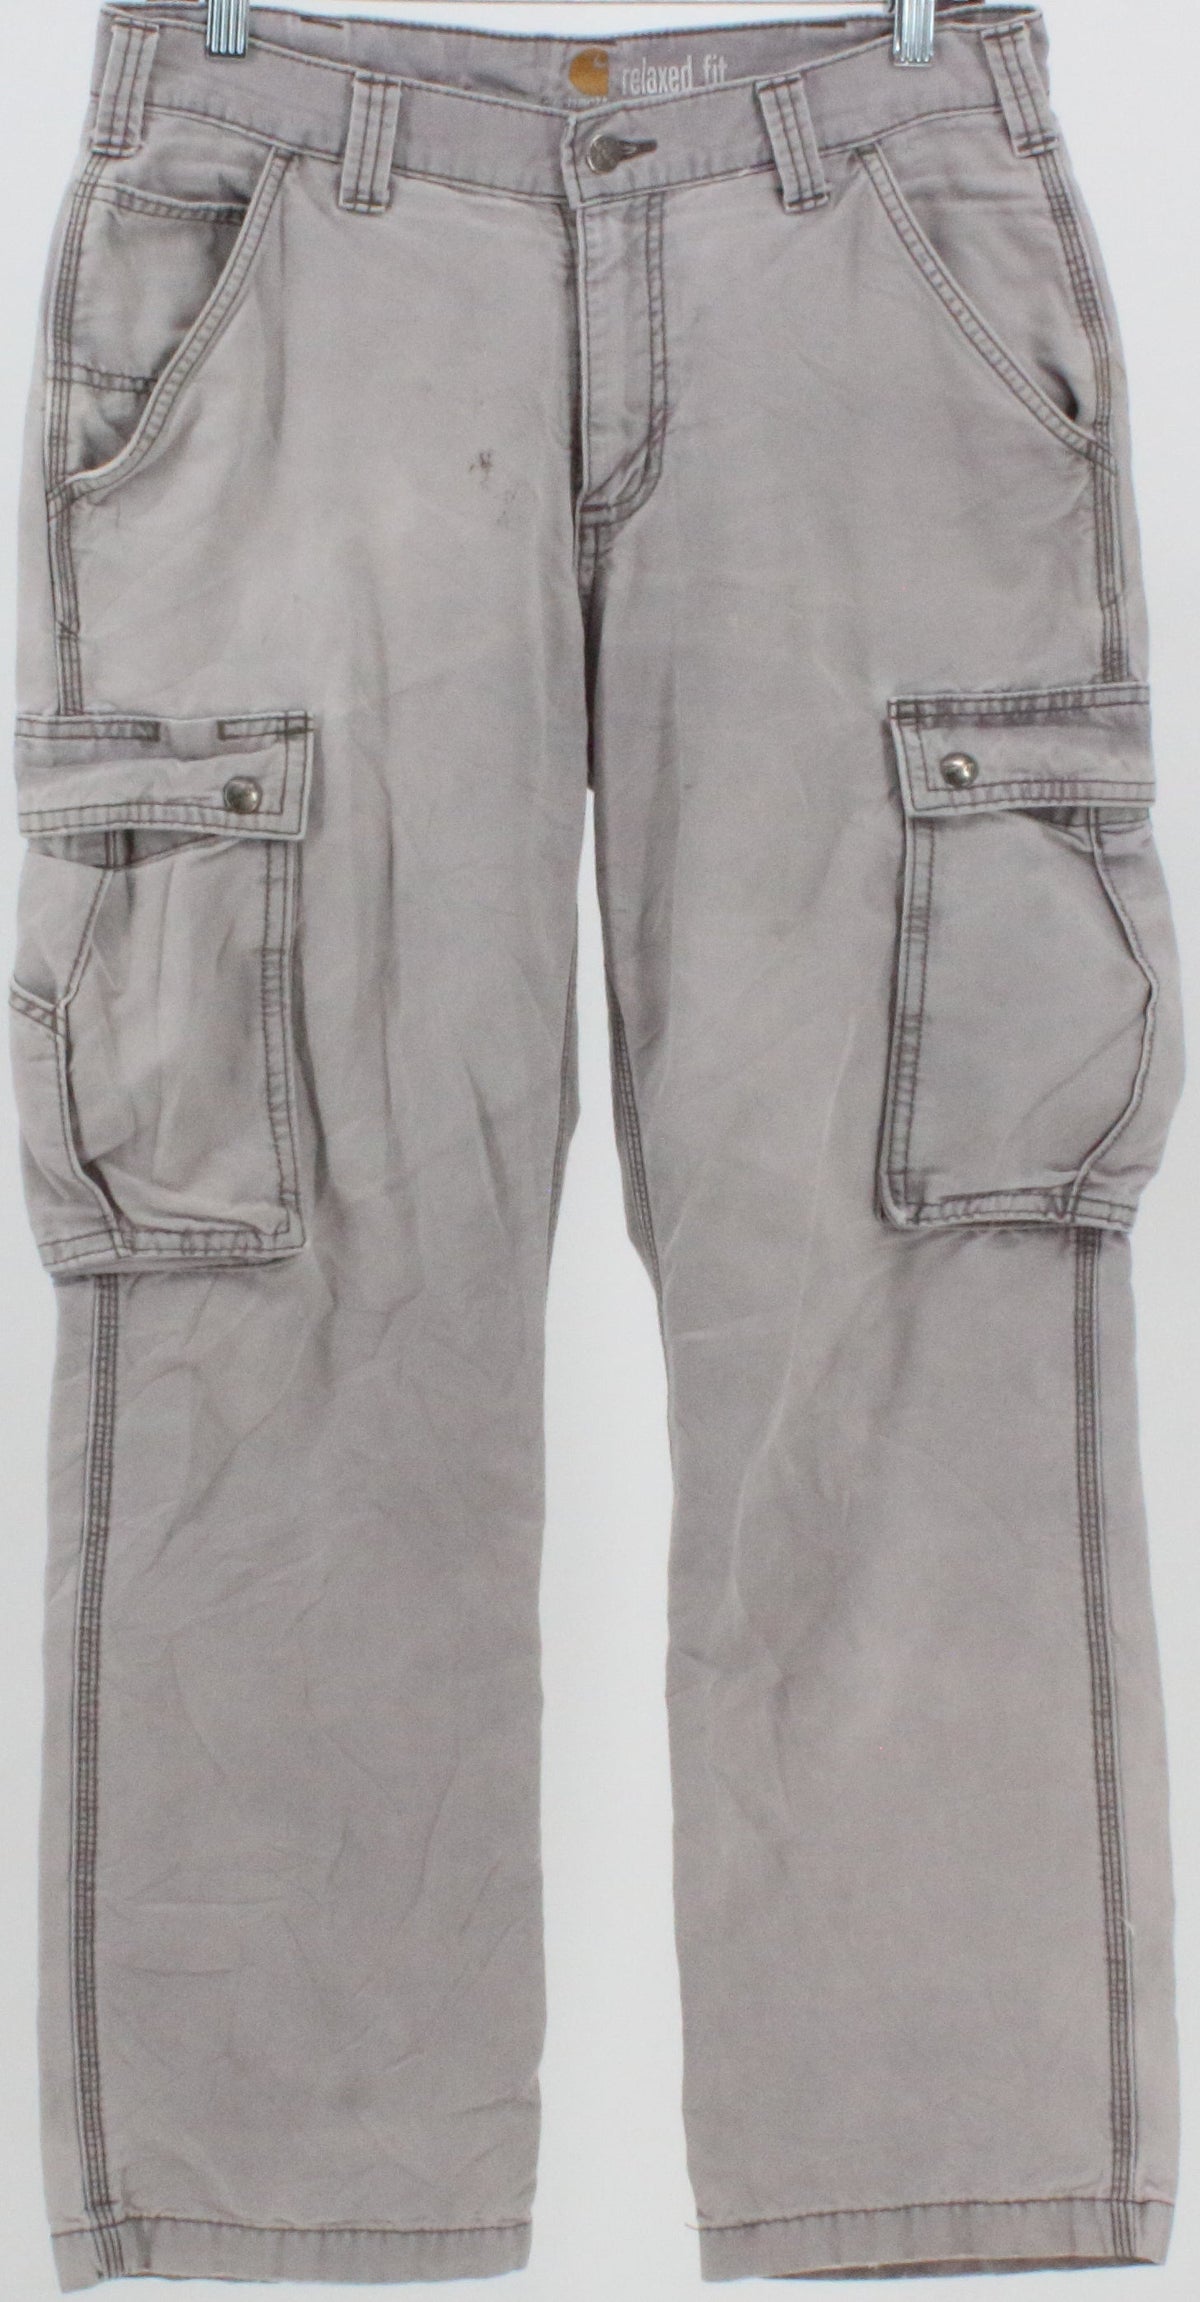 Carhartt Light Grey Relaxed Fit Cargo Pants